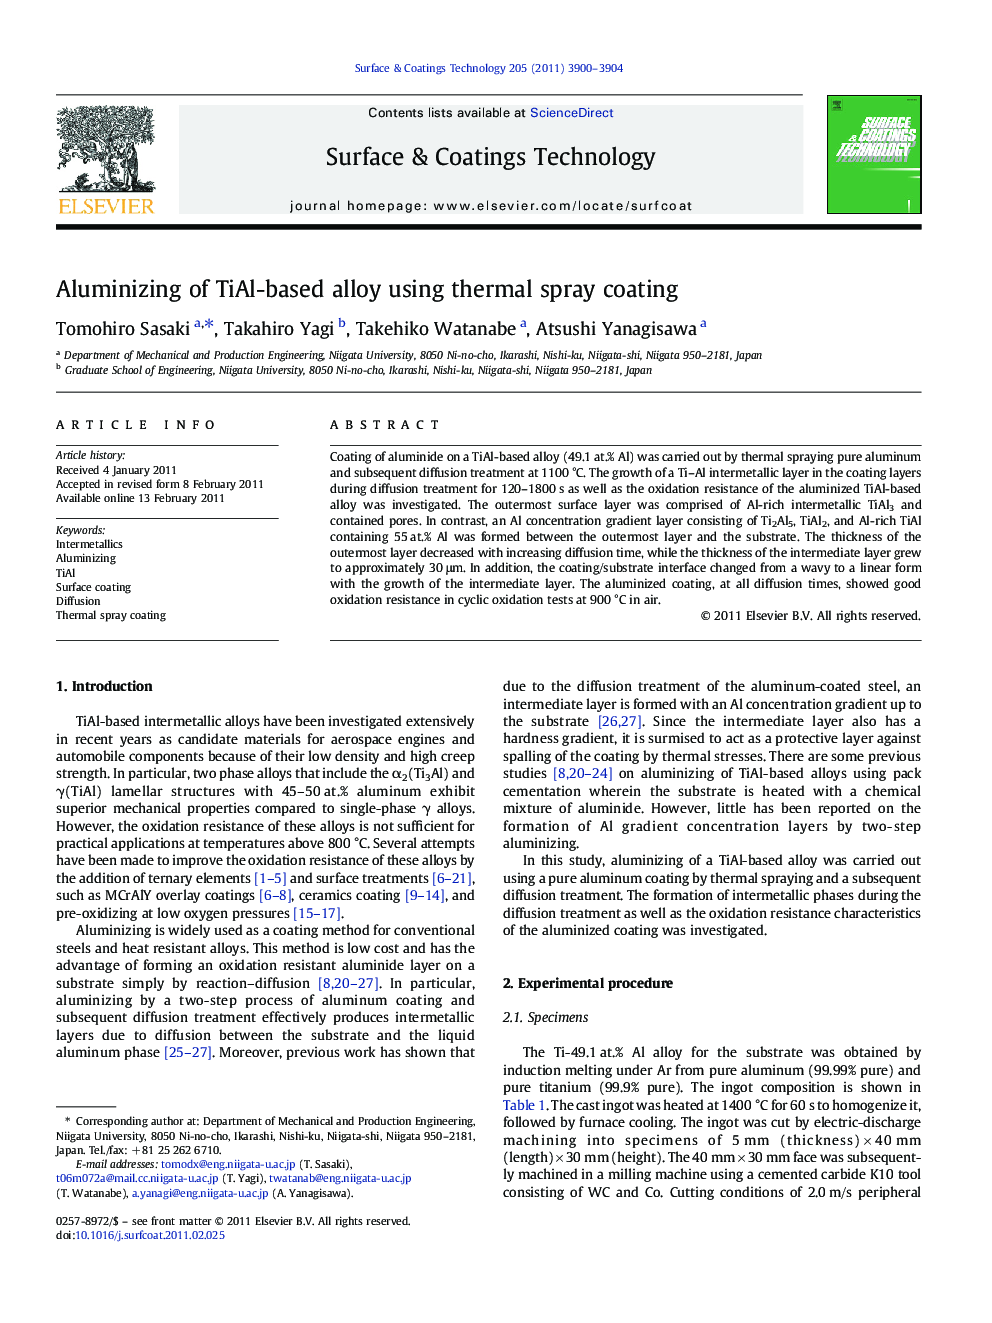 Aluminizing of TiAl-based alloy using thermal spray coating